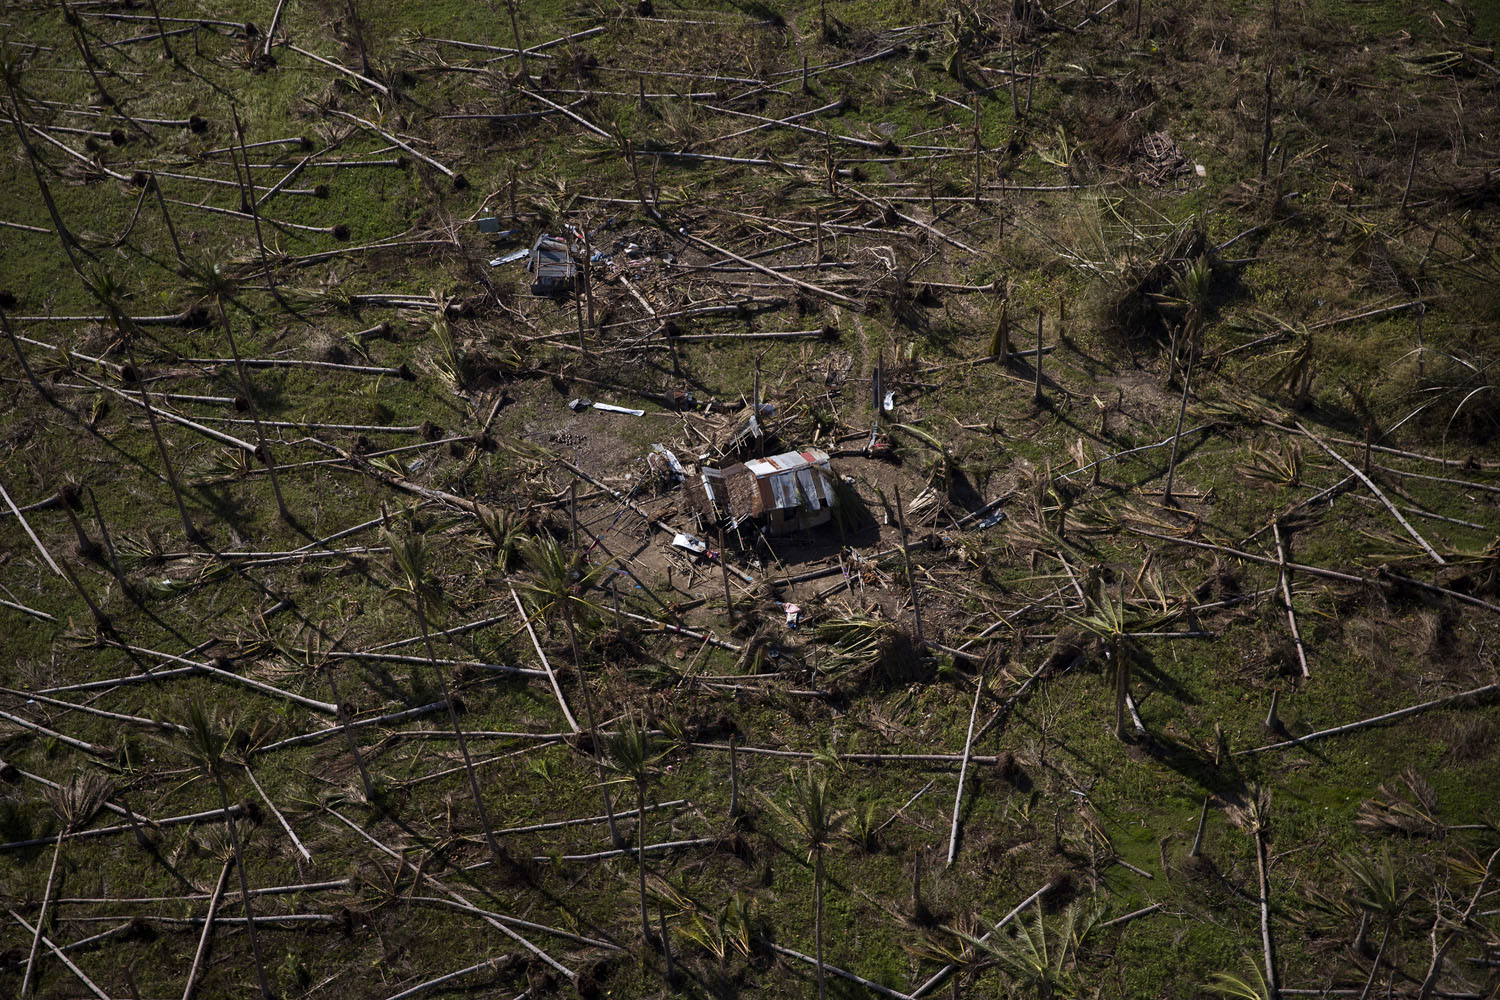 An aerial view of the countryside near Tacloban, Nov. 18, 2013.